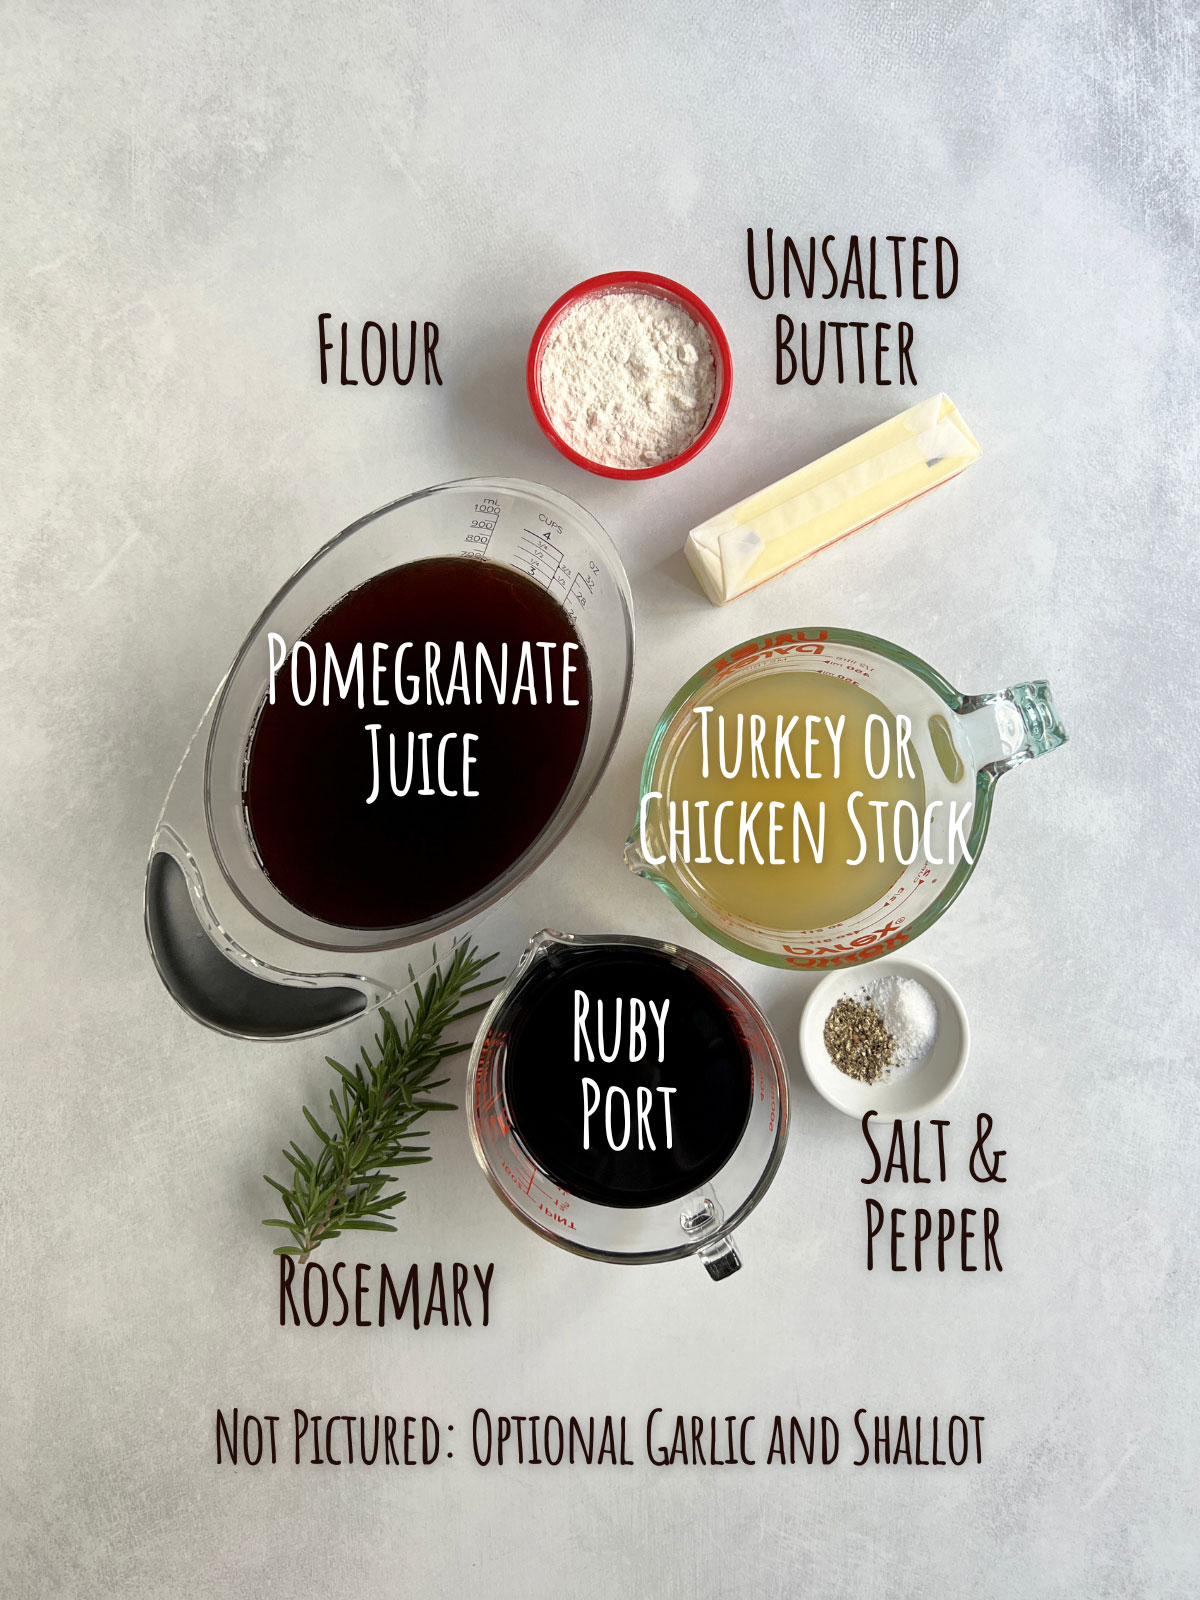 Ingredient shot for pomegranate gravy show all the liquids and flavoring ingredients.